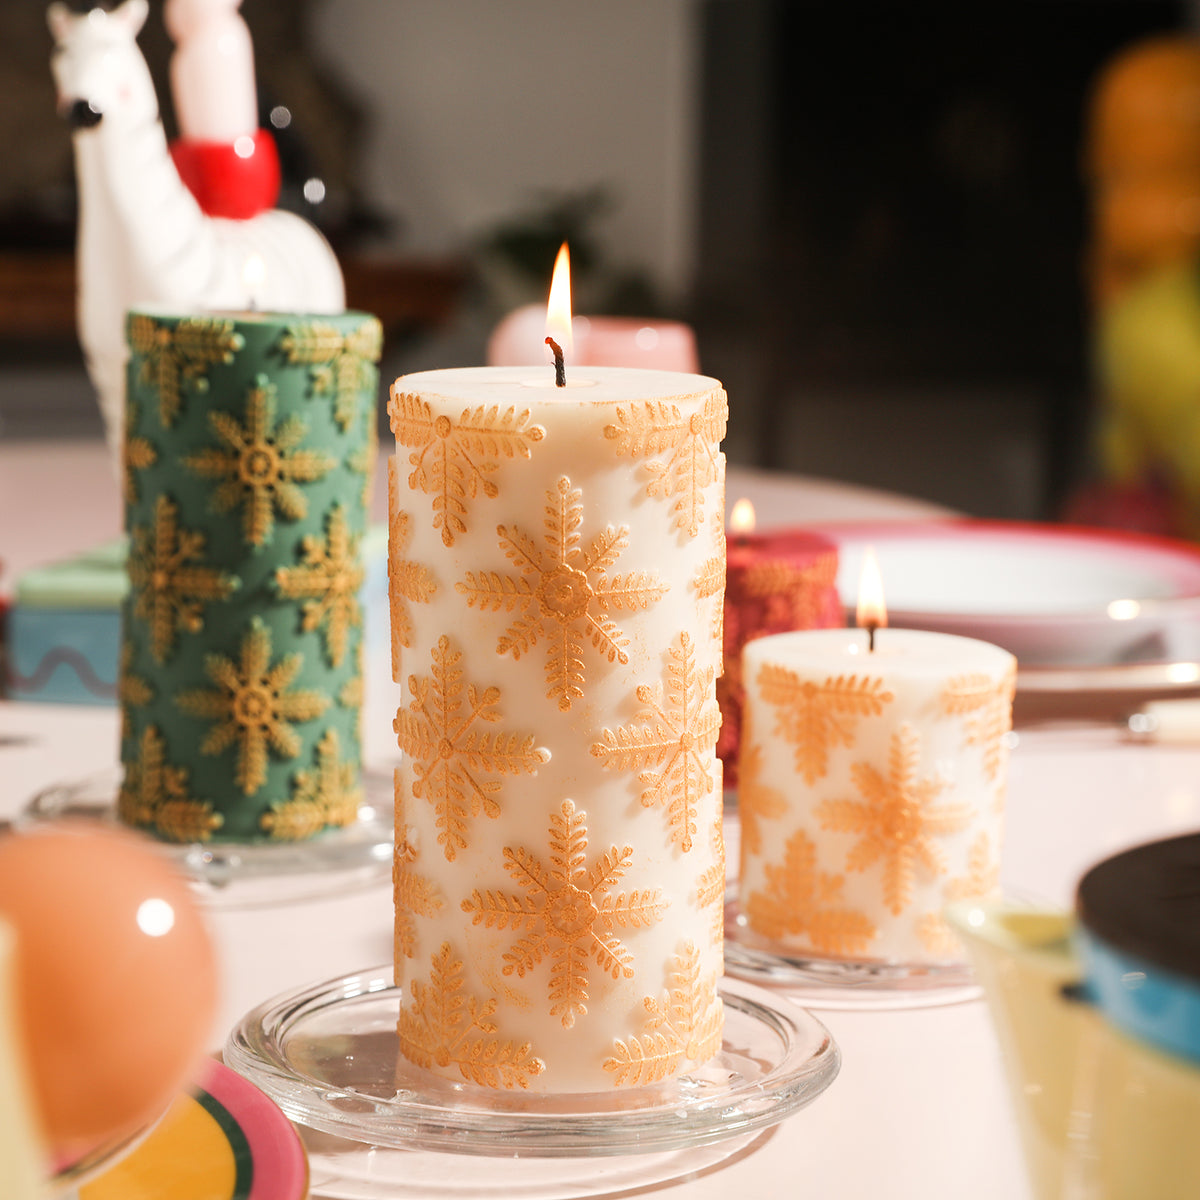 How To Make A Silicone Mold For Candles